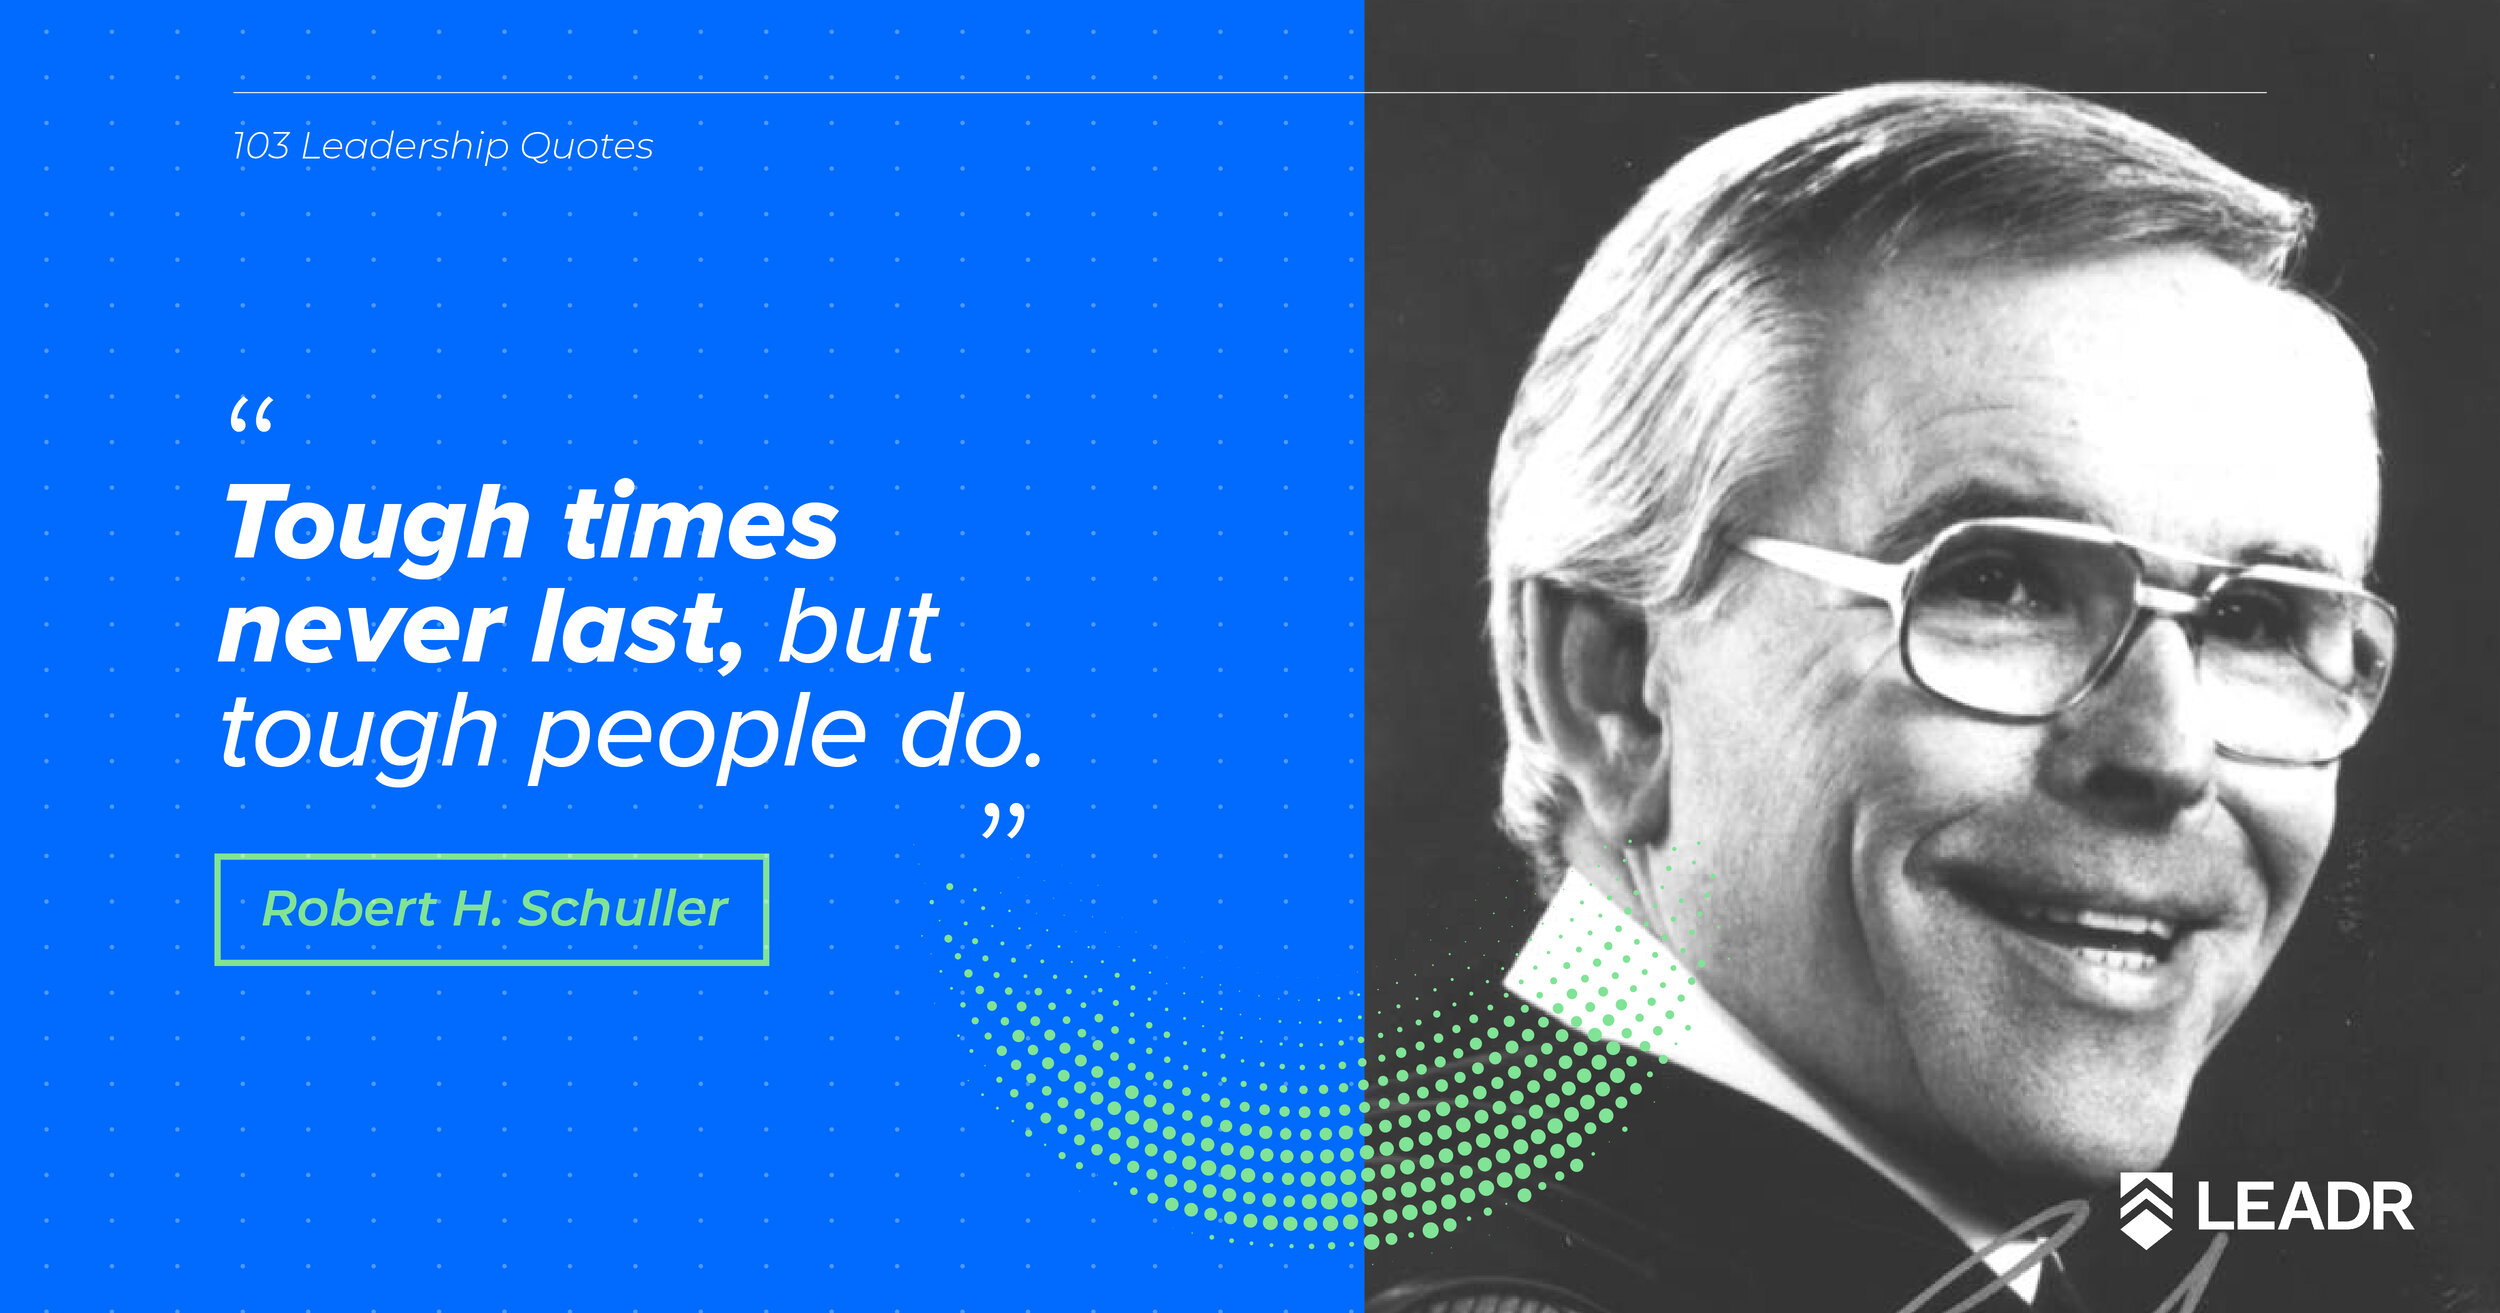 Royalty free downloadable leadership quotes - Robert Schuller